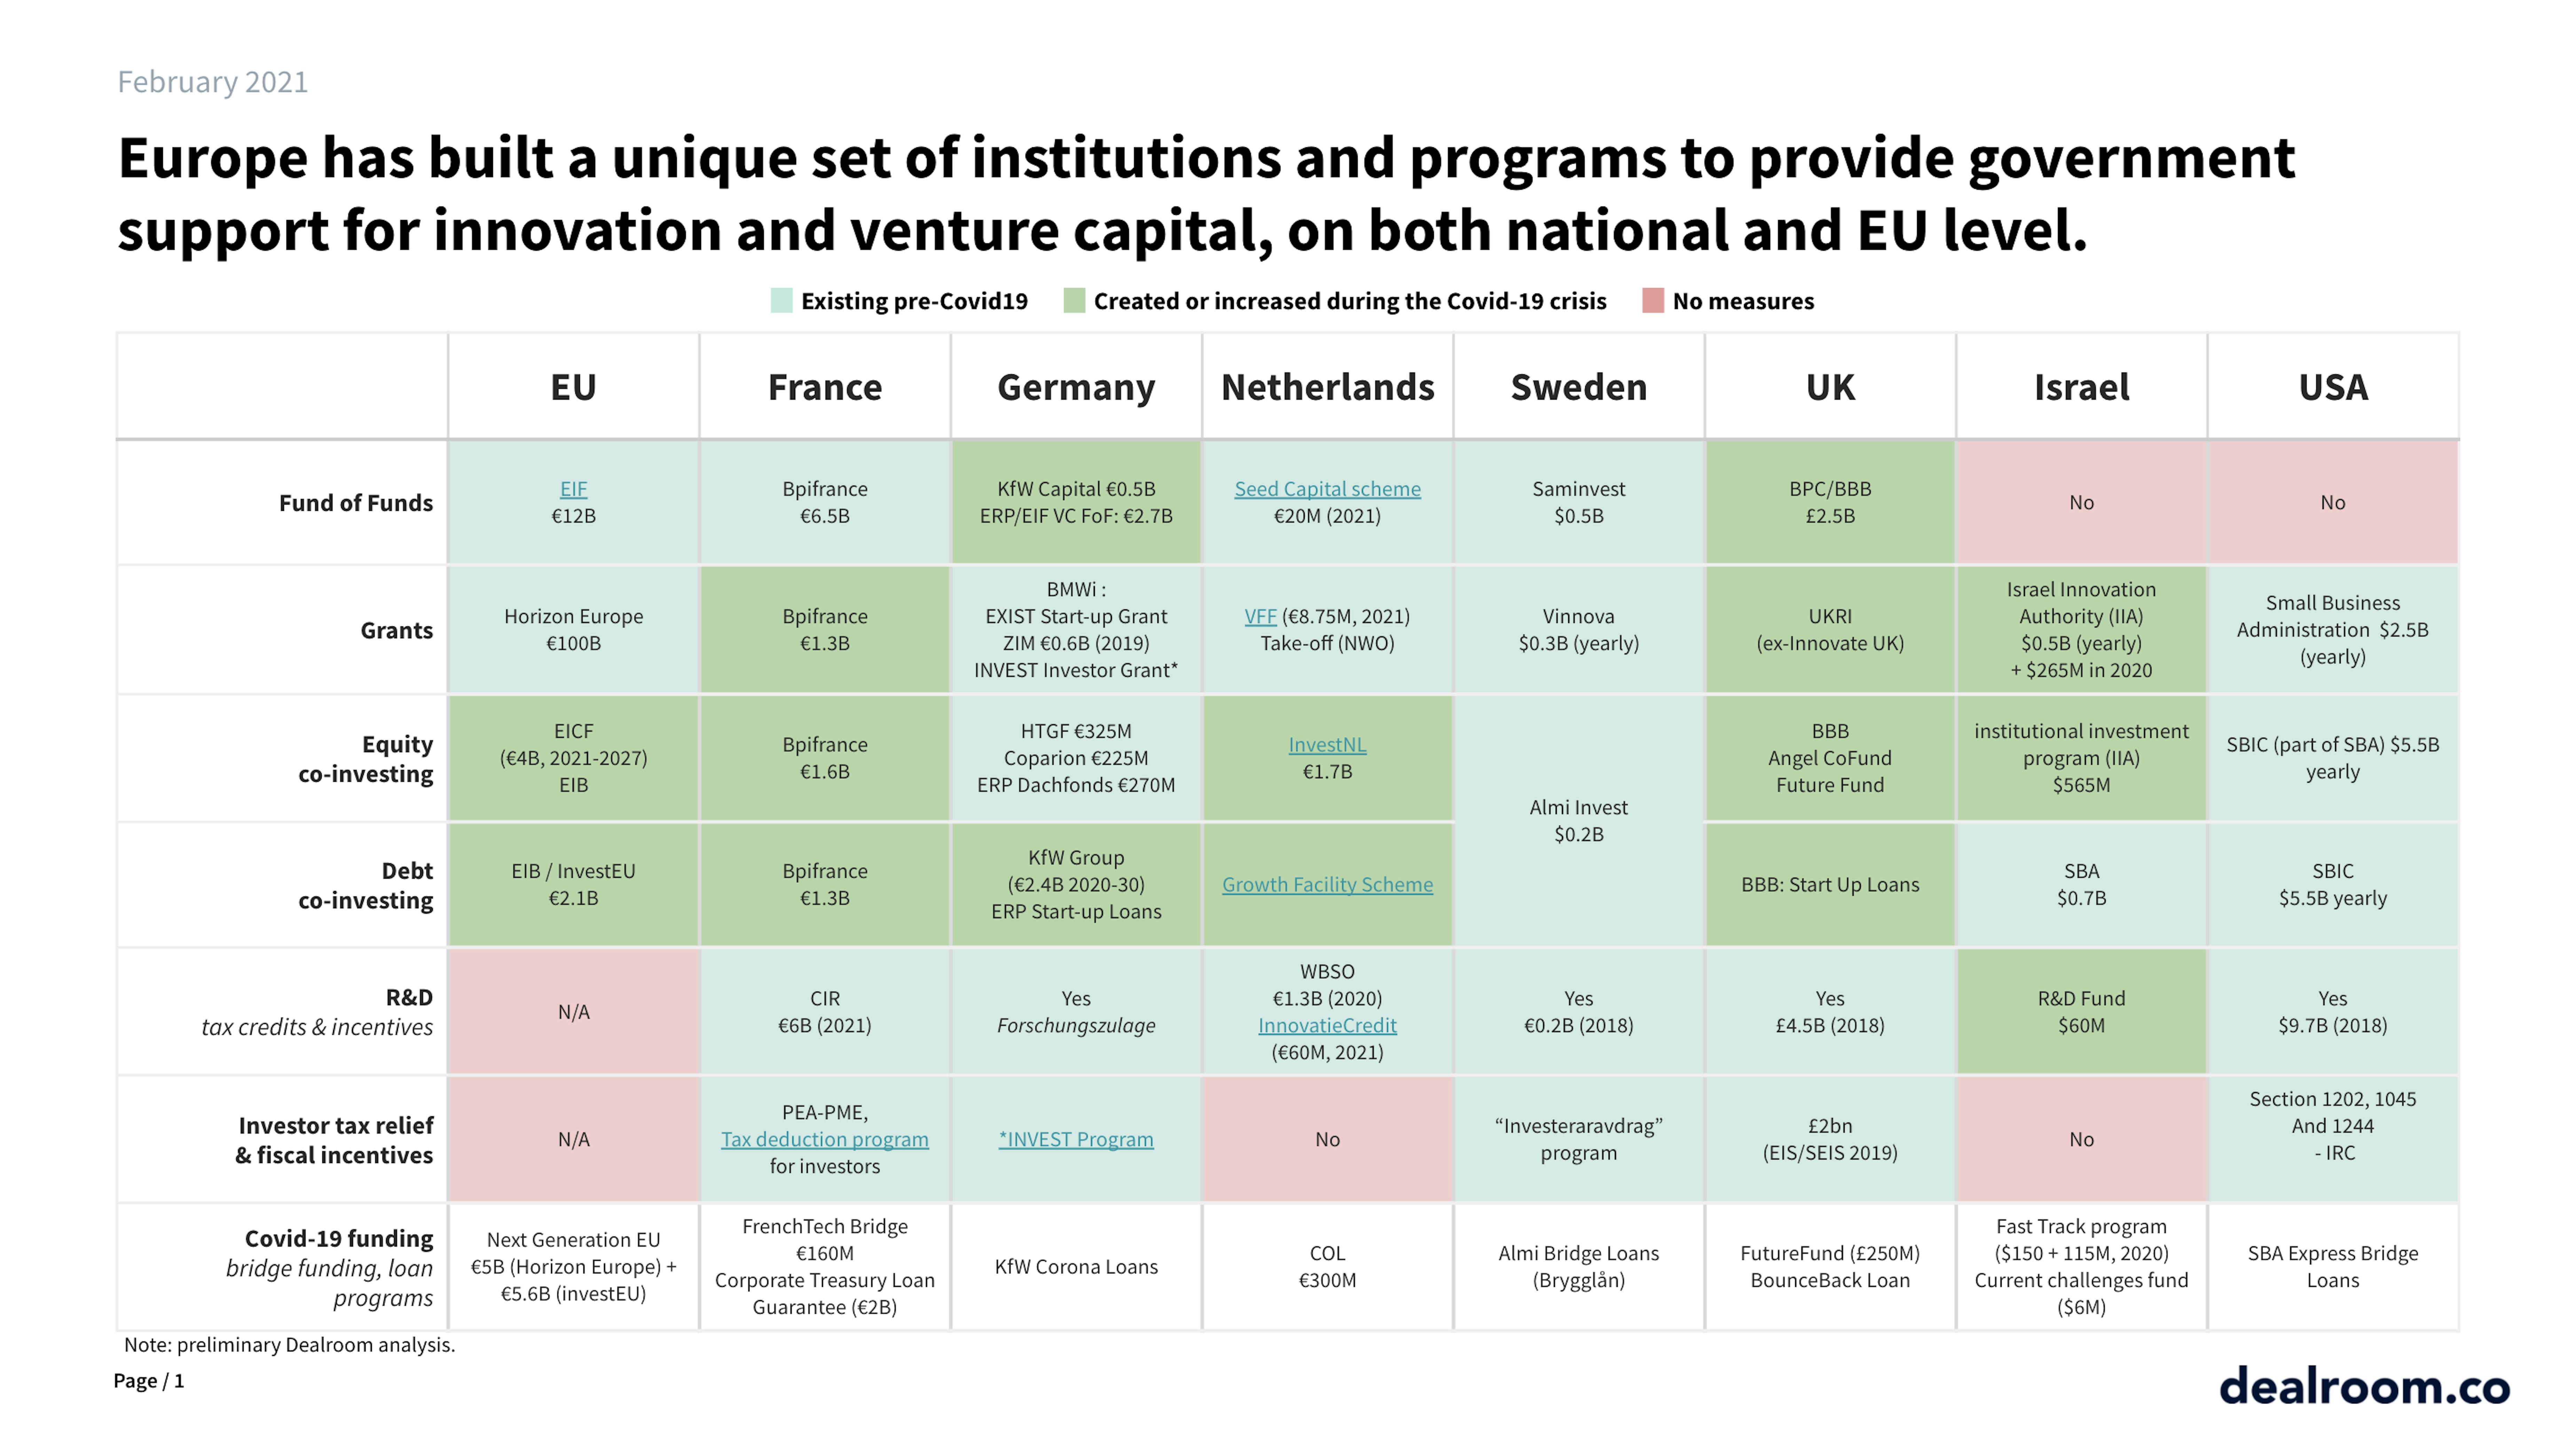 European Startup Nations Alliance – building Europe’s startup future